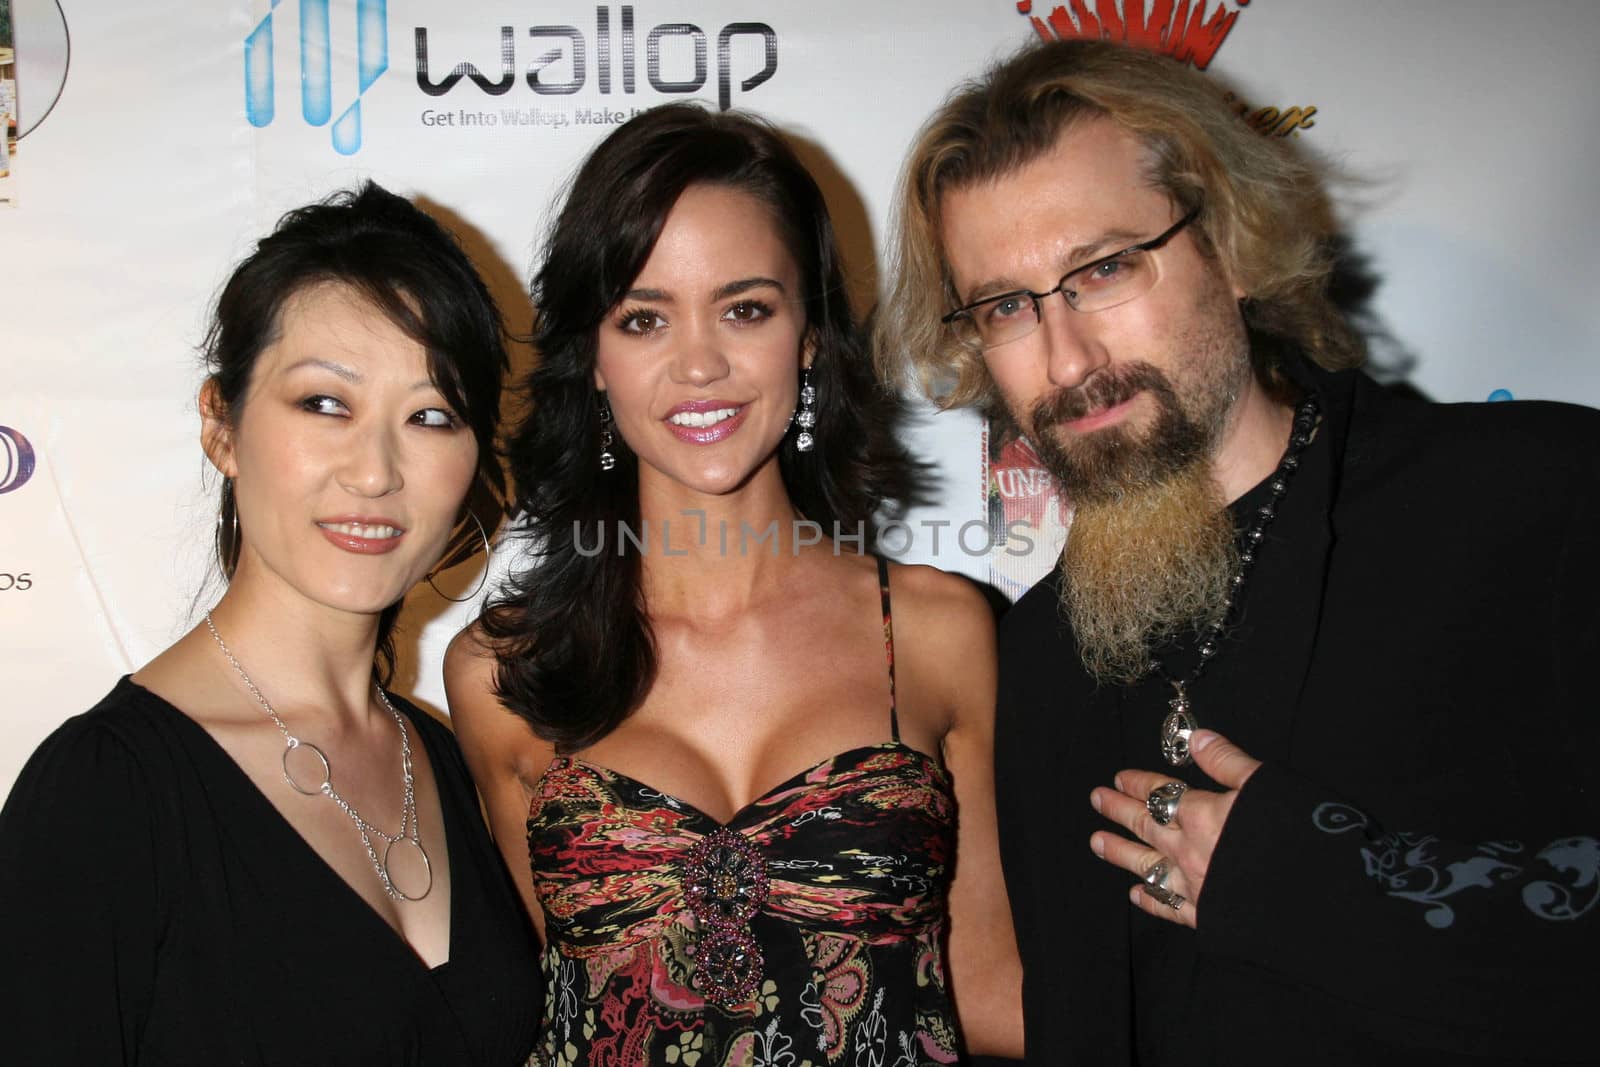 April Scott with the designers of Yoga Army
at the DVD Release Party for "The Dukes of Hazzard: The Beginning". The Forbidden City, Hollywood, CA. 03-21-07